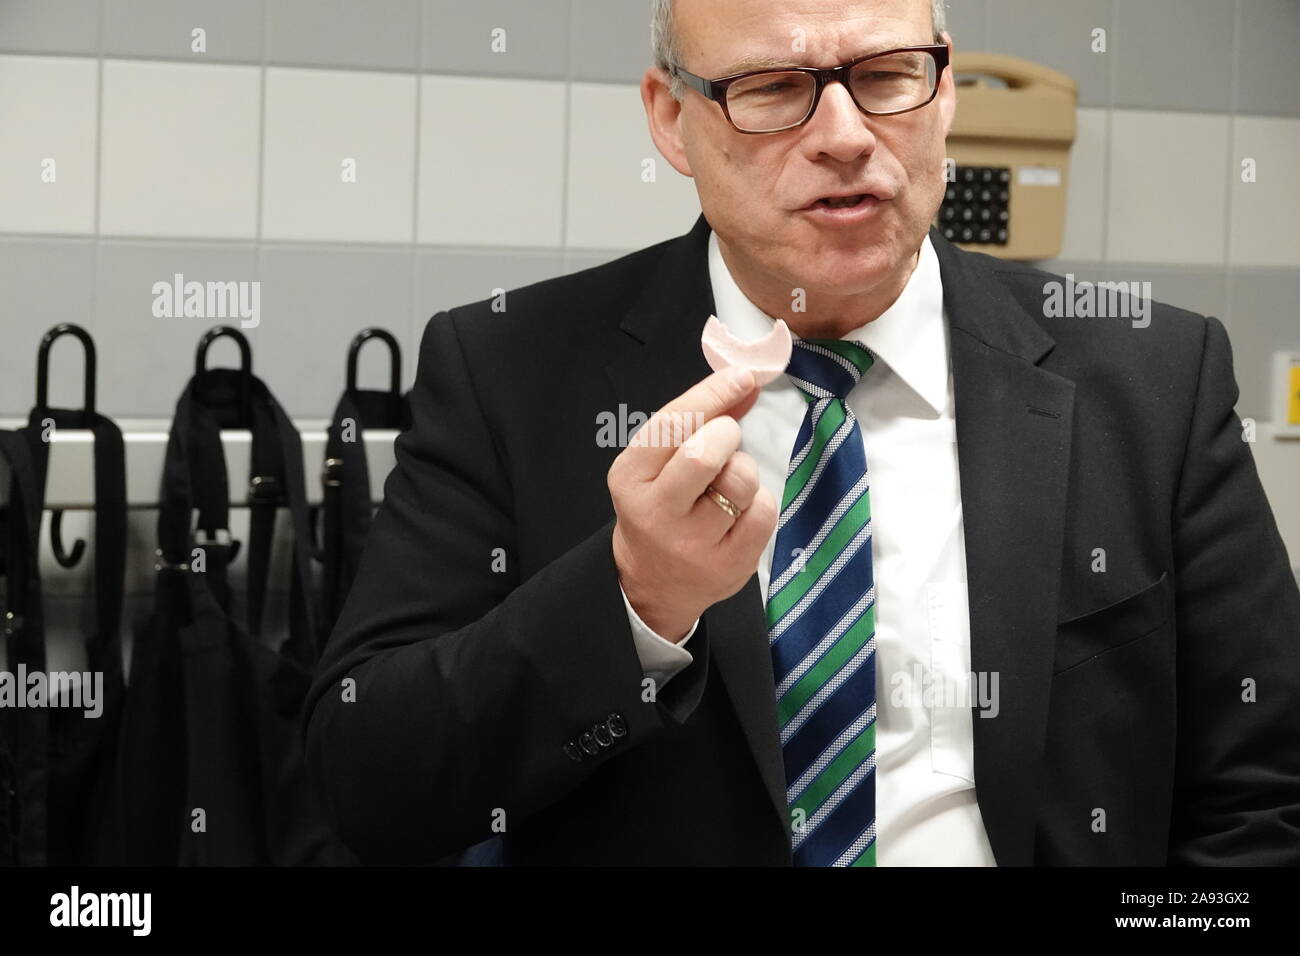 Hamburg, Germany. 12th Nov, 2019. Ties Rabe (SPD), school senator in Hamburg, is a piece of meat sausage at the school breakfast 'Brotzeit' at the Brothers Grimm School in Hamburg-Billstedt. According to the association, which the actress Uschi Glas founded with her husband in 2009, 'Brotzeit' organizes a daily breakfast offer with schools, volunteers and food companies at 210 schools nationwide. Credit: Tim Vogel/dpa/Alamy Live News Stock Photo